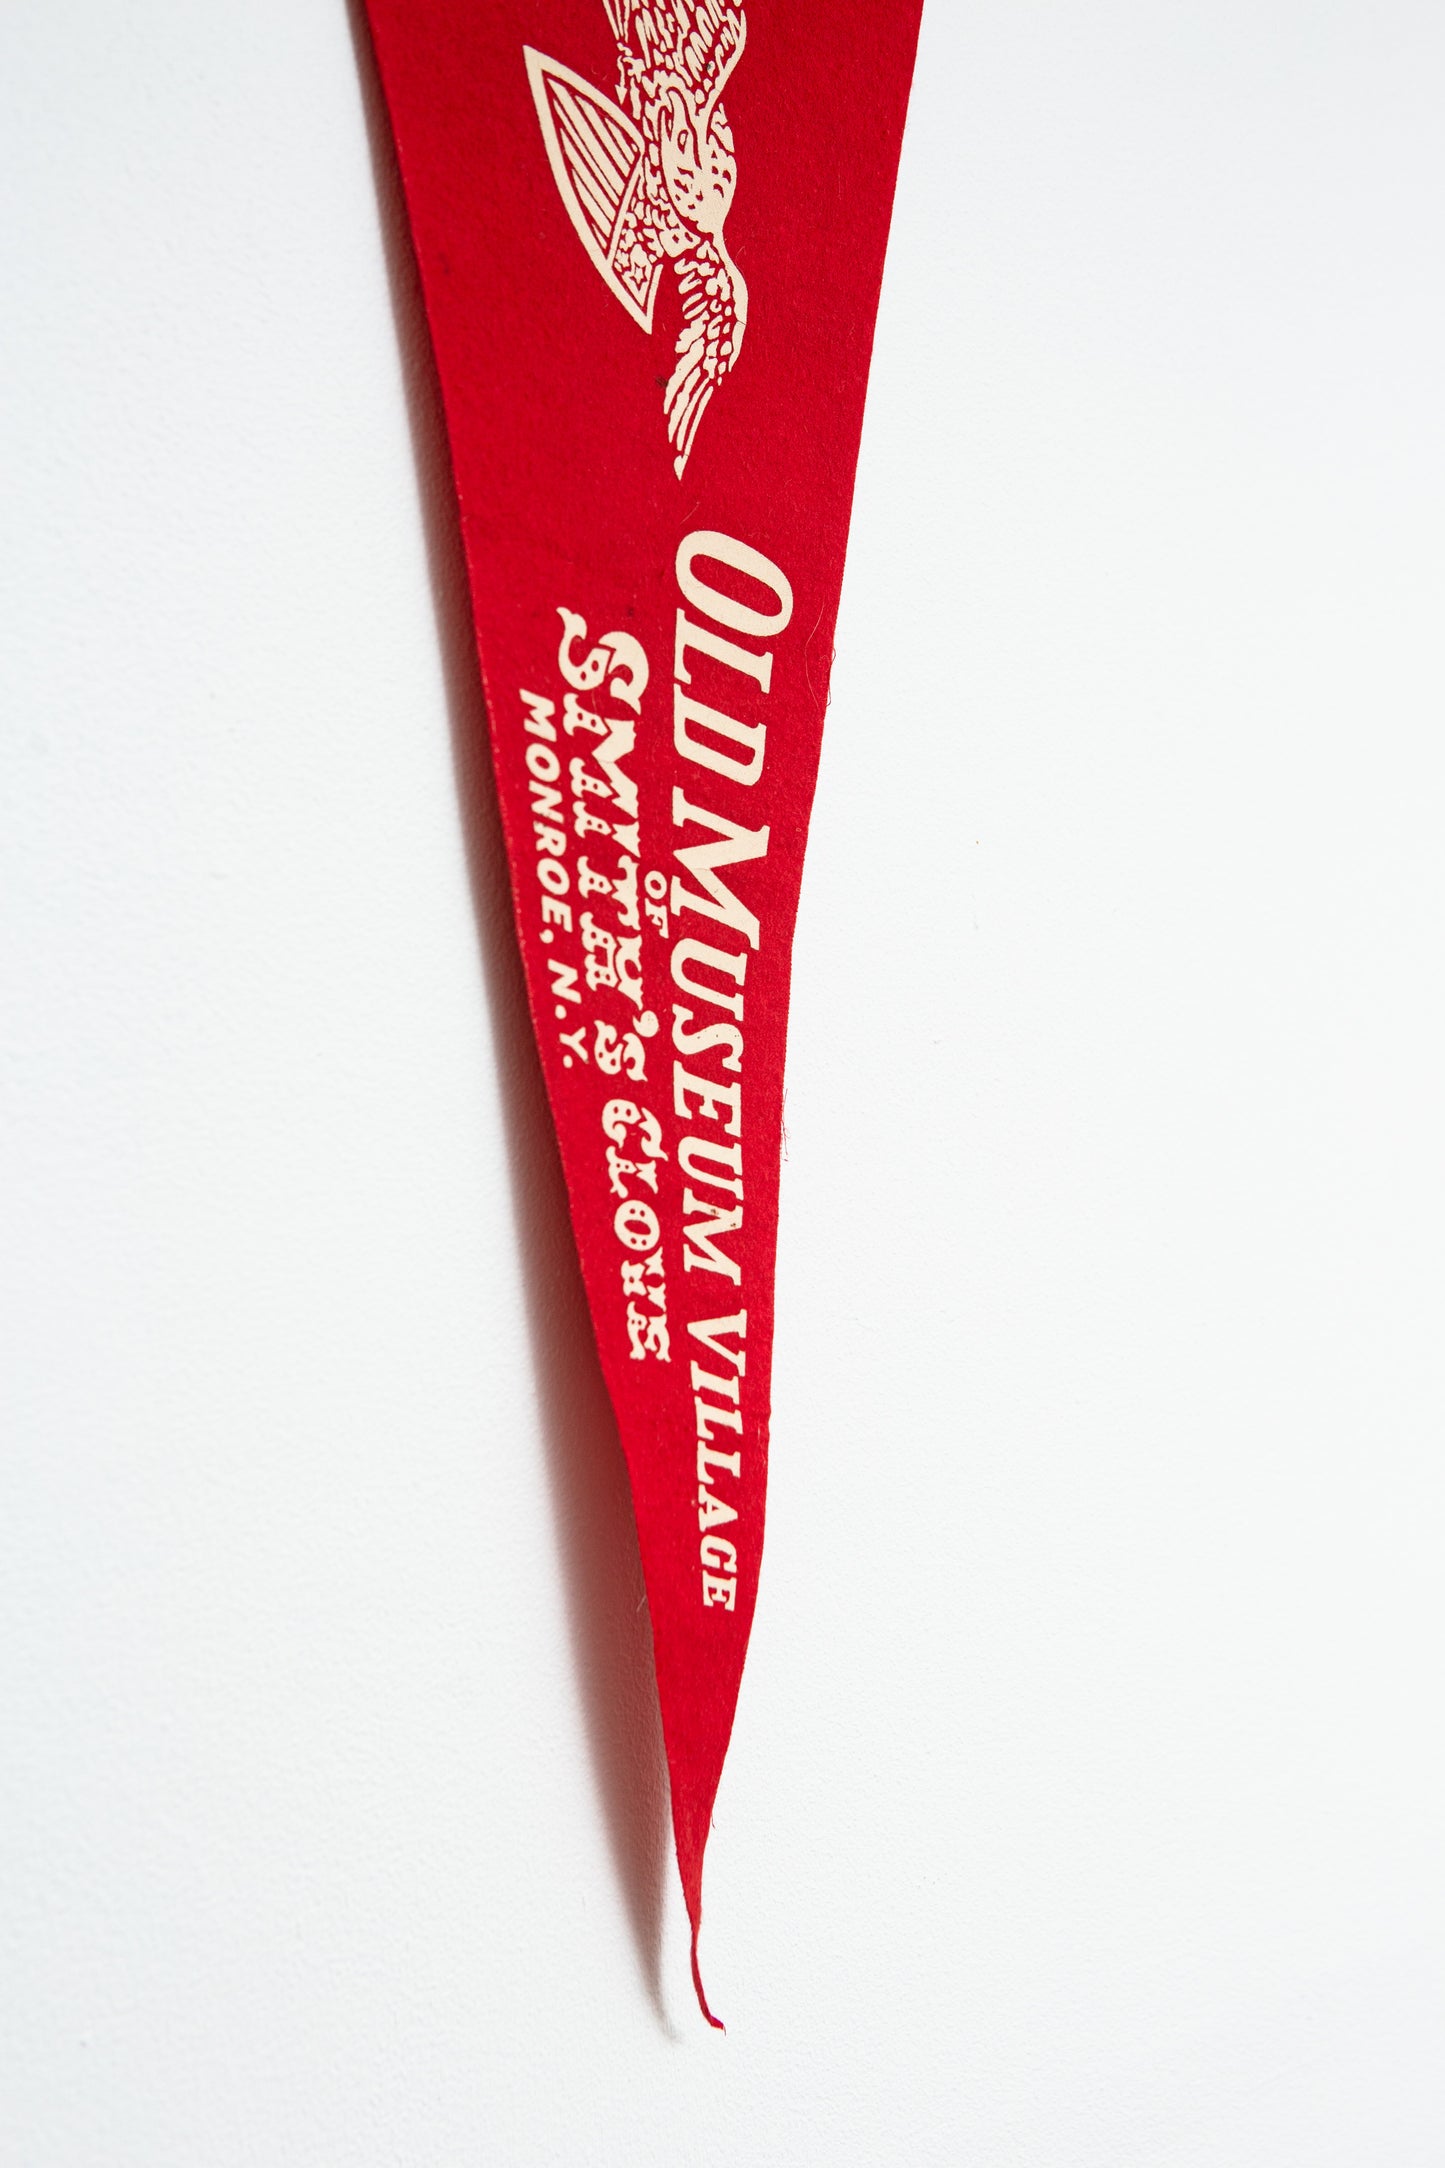 1950's Old Museum Village of Smith's Clove pennant